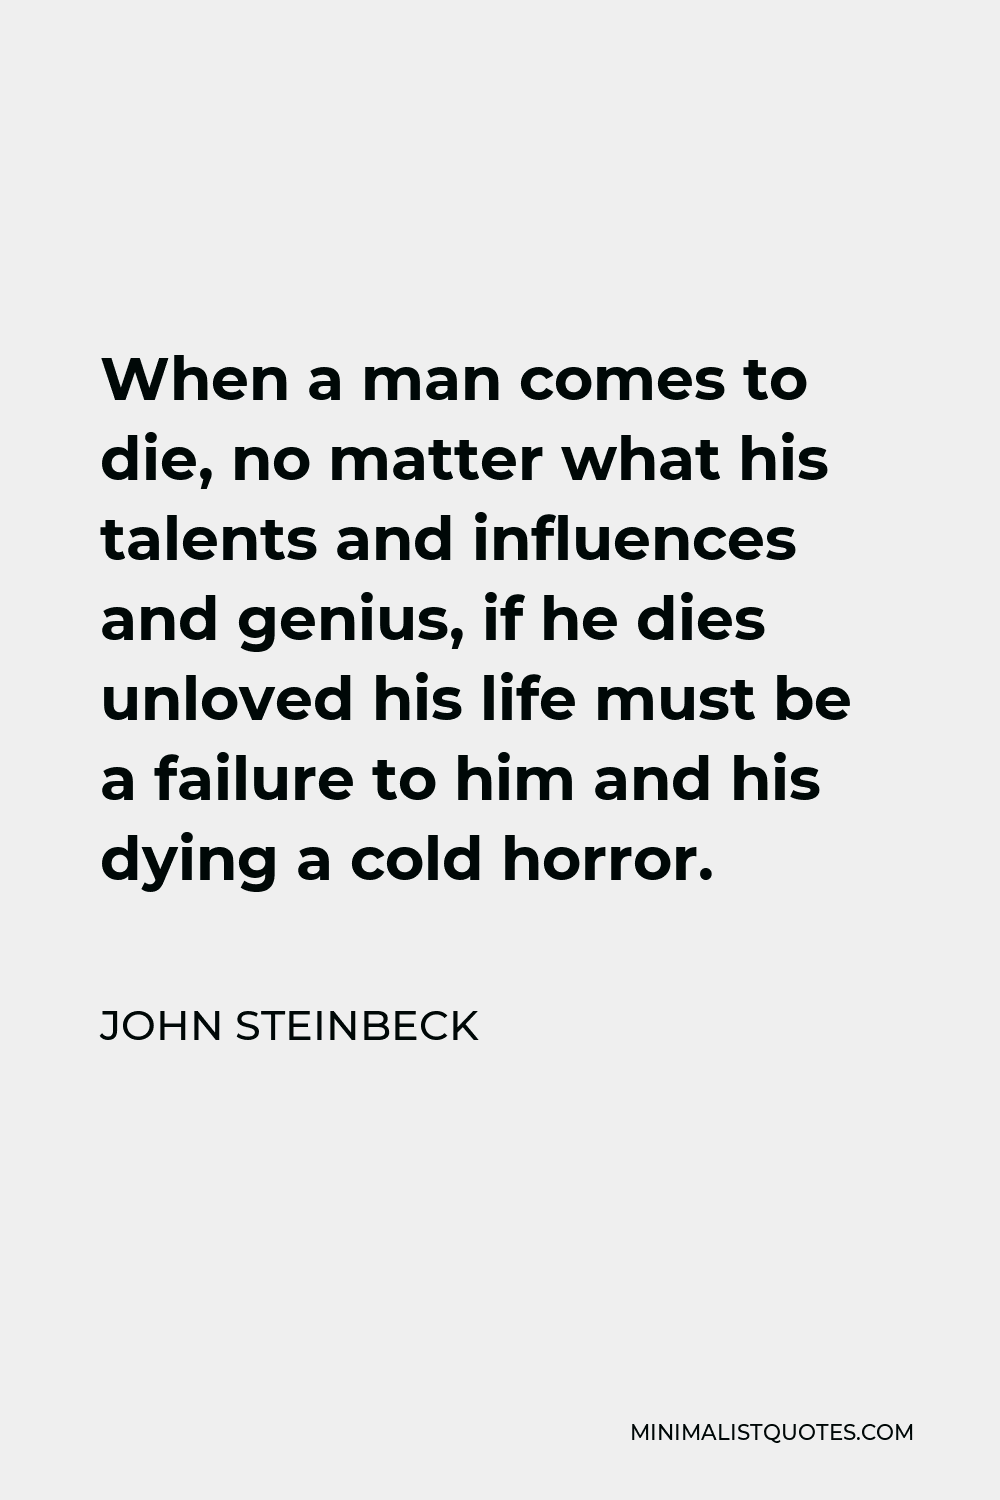 John Steinbeck Quote - When a man comes to die, no matter what his talents and influences and genius, if he dies unloved his life must be a failure to him and his dying a cold horror.